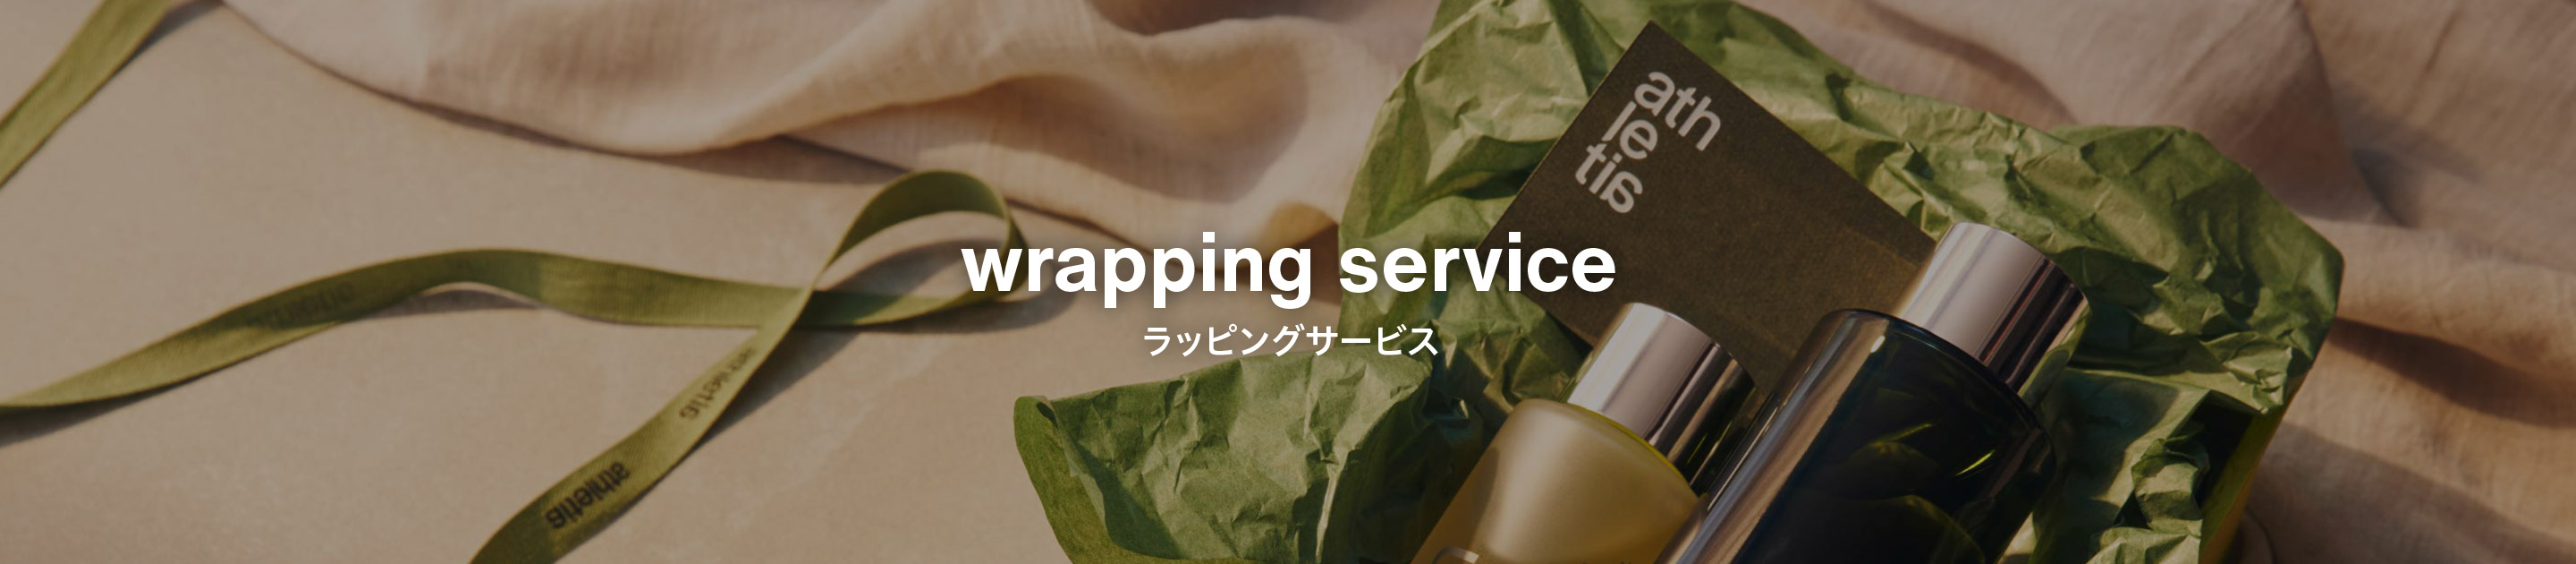 wrapping service ラッピングサービス